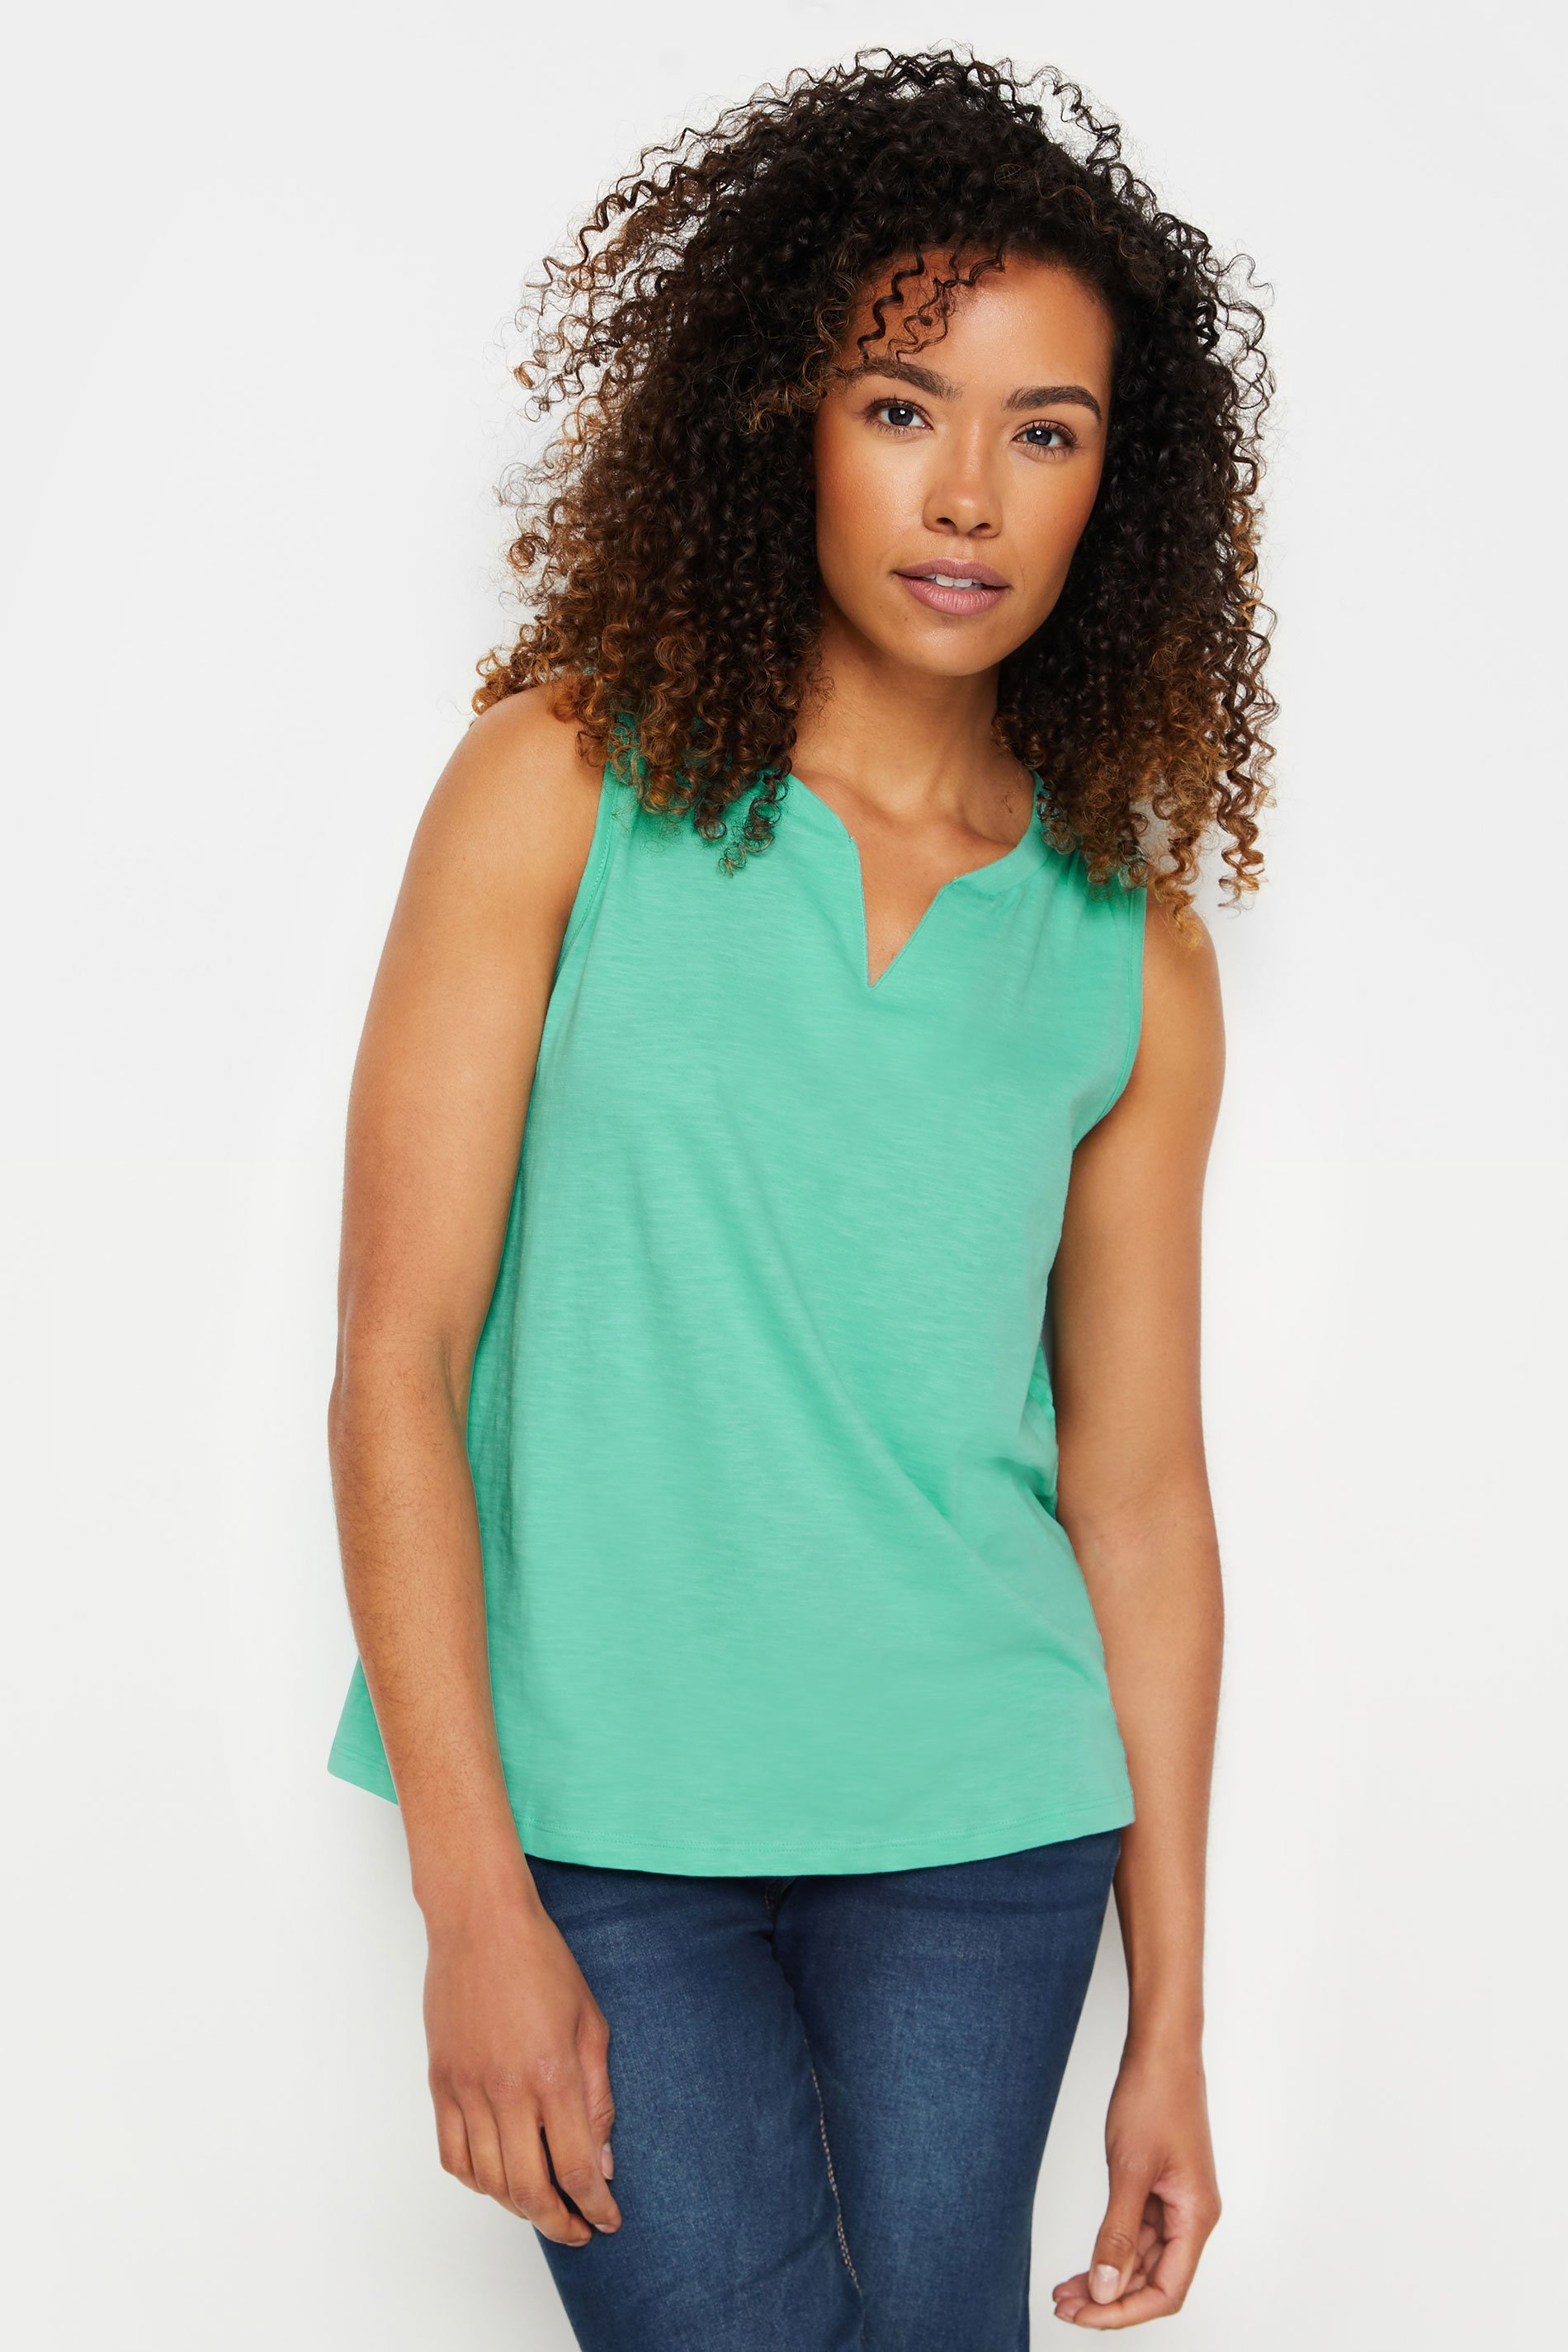 M&Co 2 Pack White & Green Notch Neck Sleeveless Cotton Tops | M&Co 2